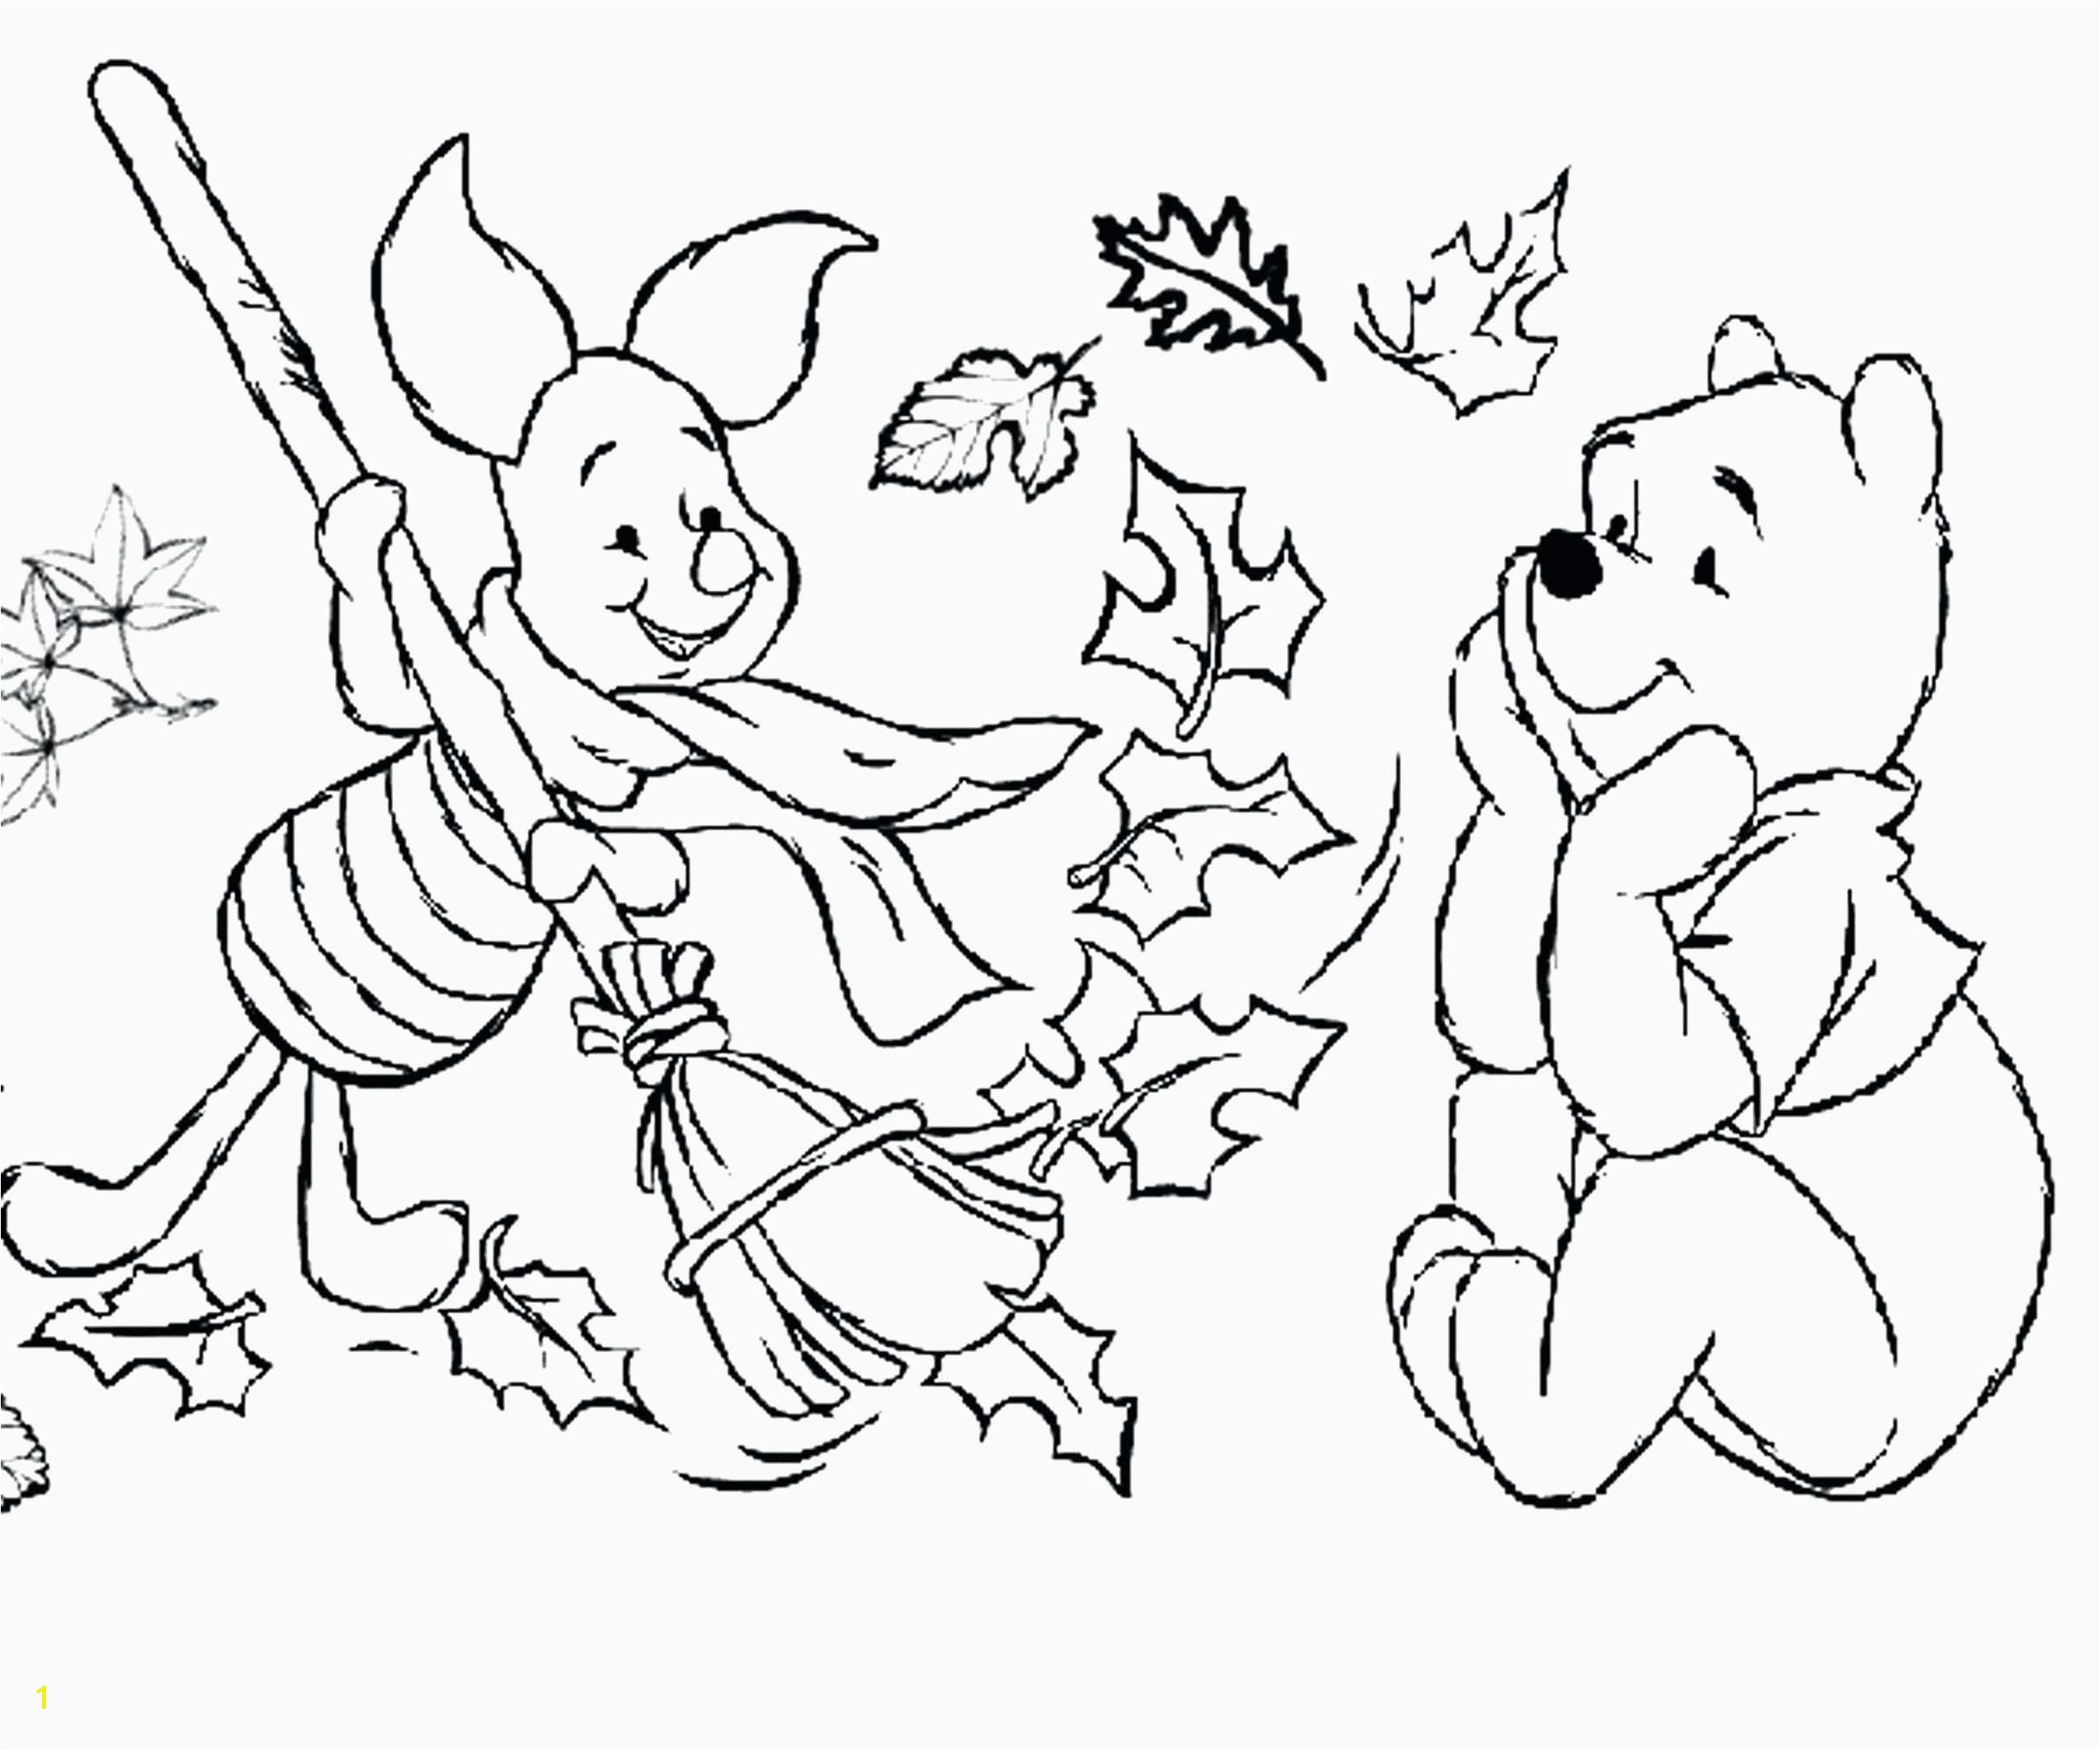 Coloring Pages for 10 Year Old Girls 30 Kids Coloring Pages for Girls Free